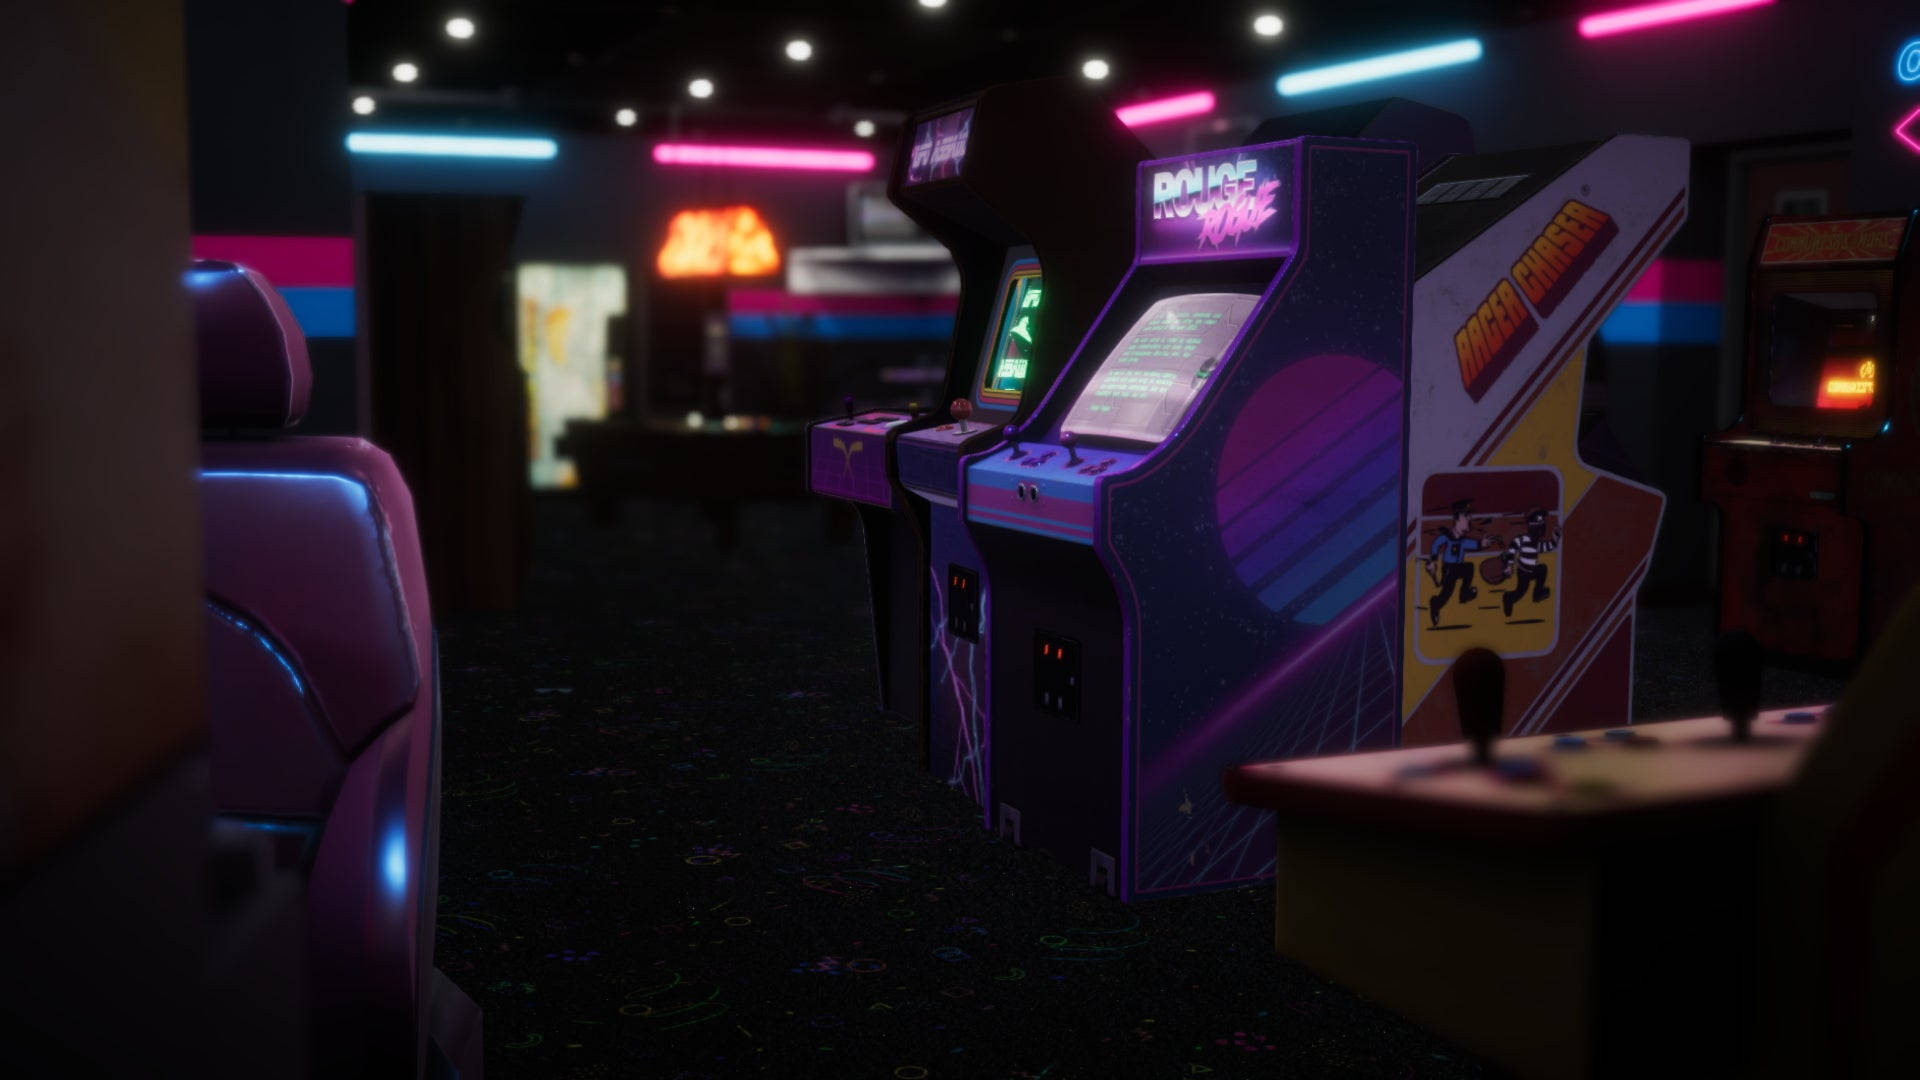 Enjoy the thrill of endless gaming fun with the arcade Wallpaper